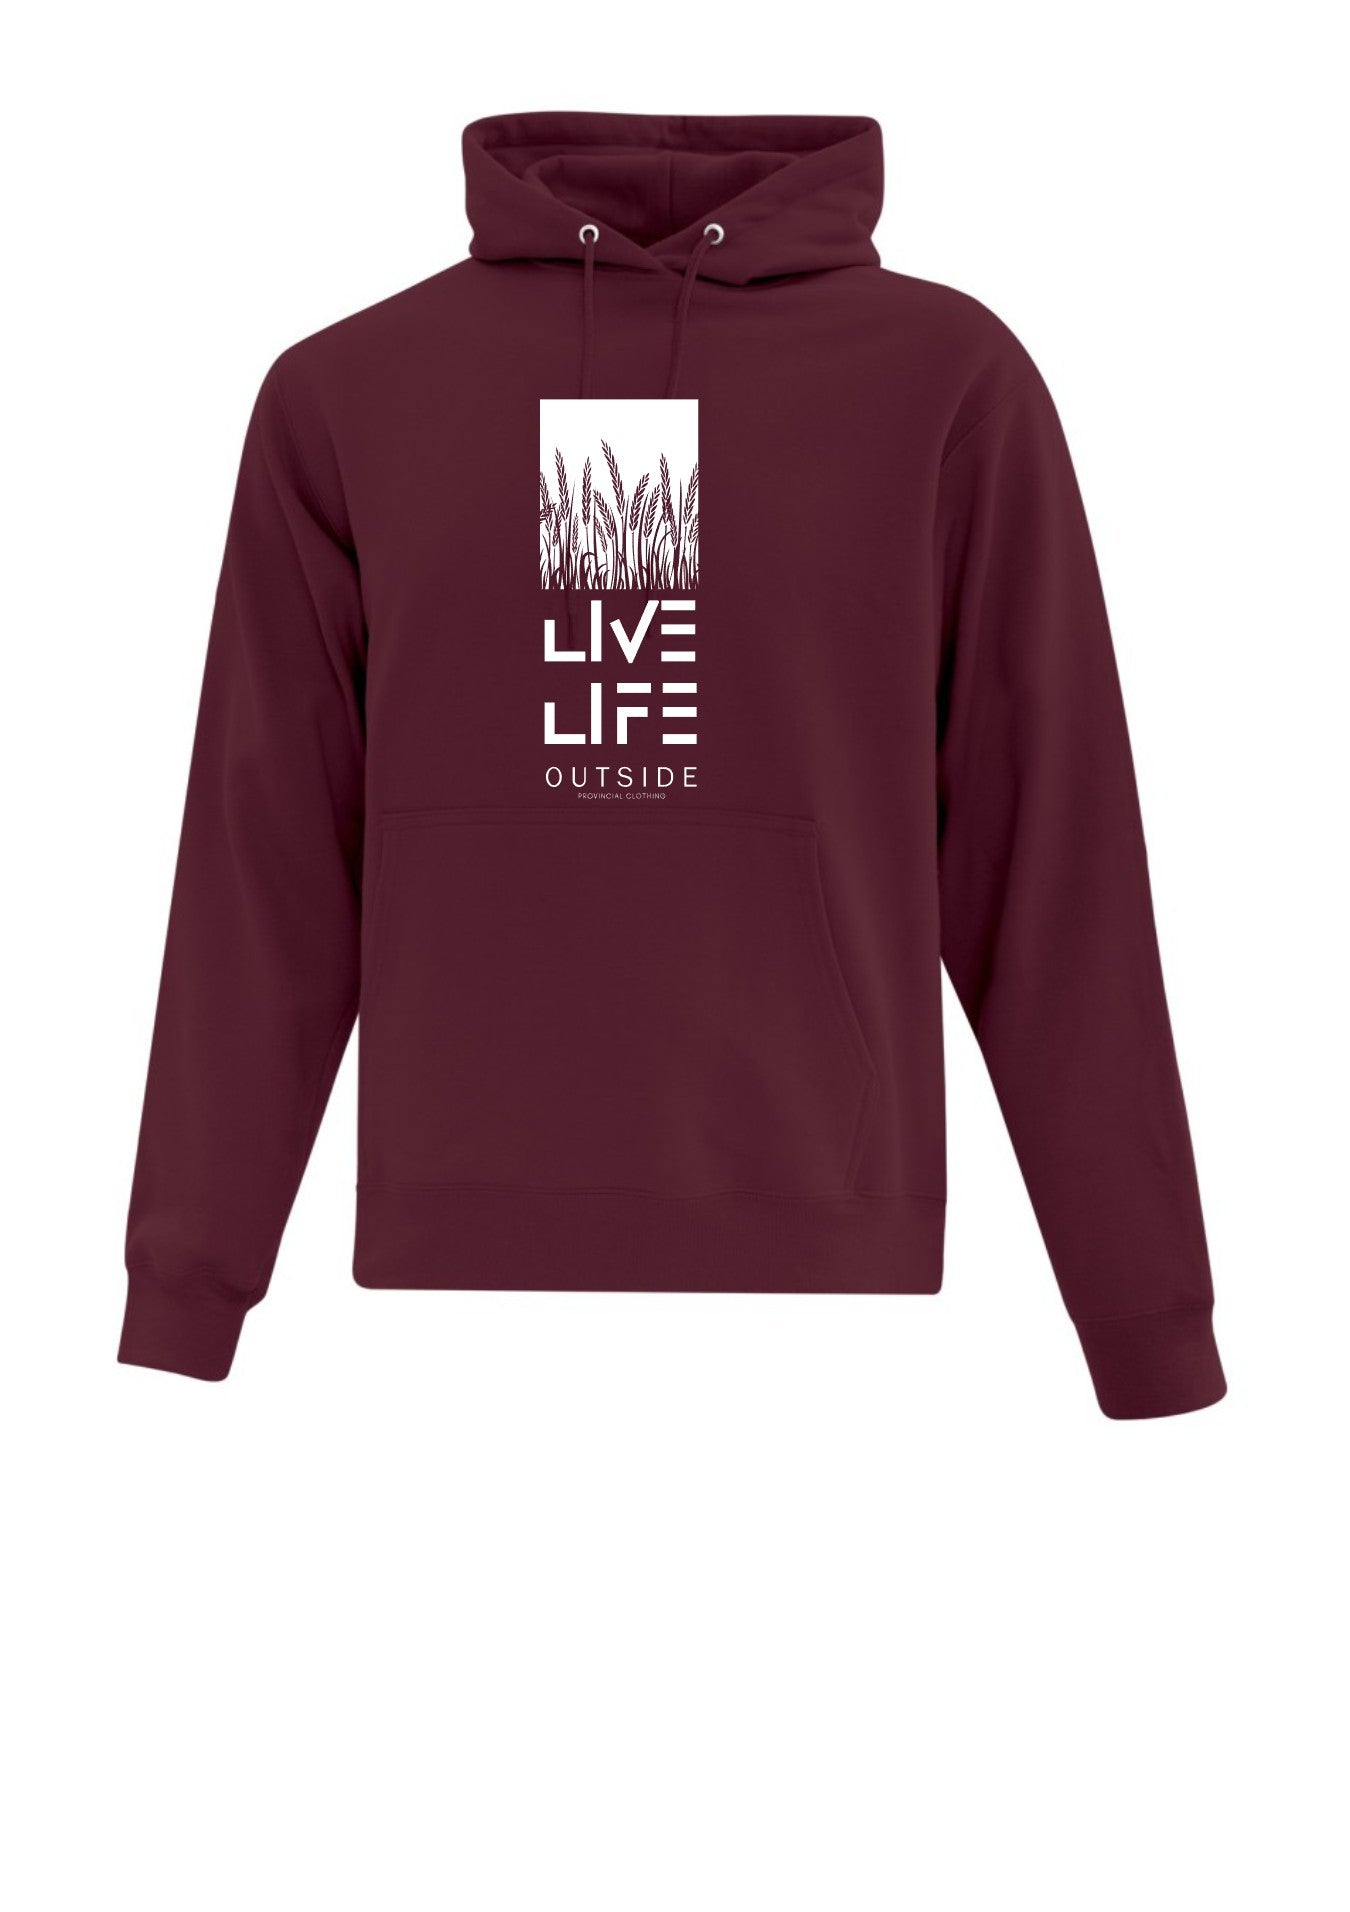 WHEAT New* Live Provincial – Outside- Life *Brand Hoodie Clothing